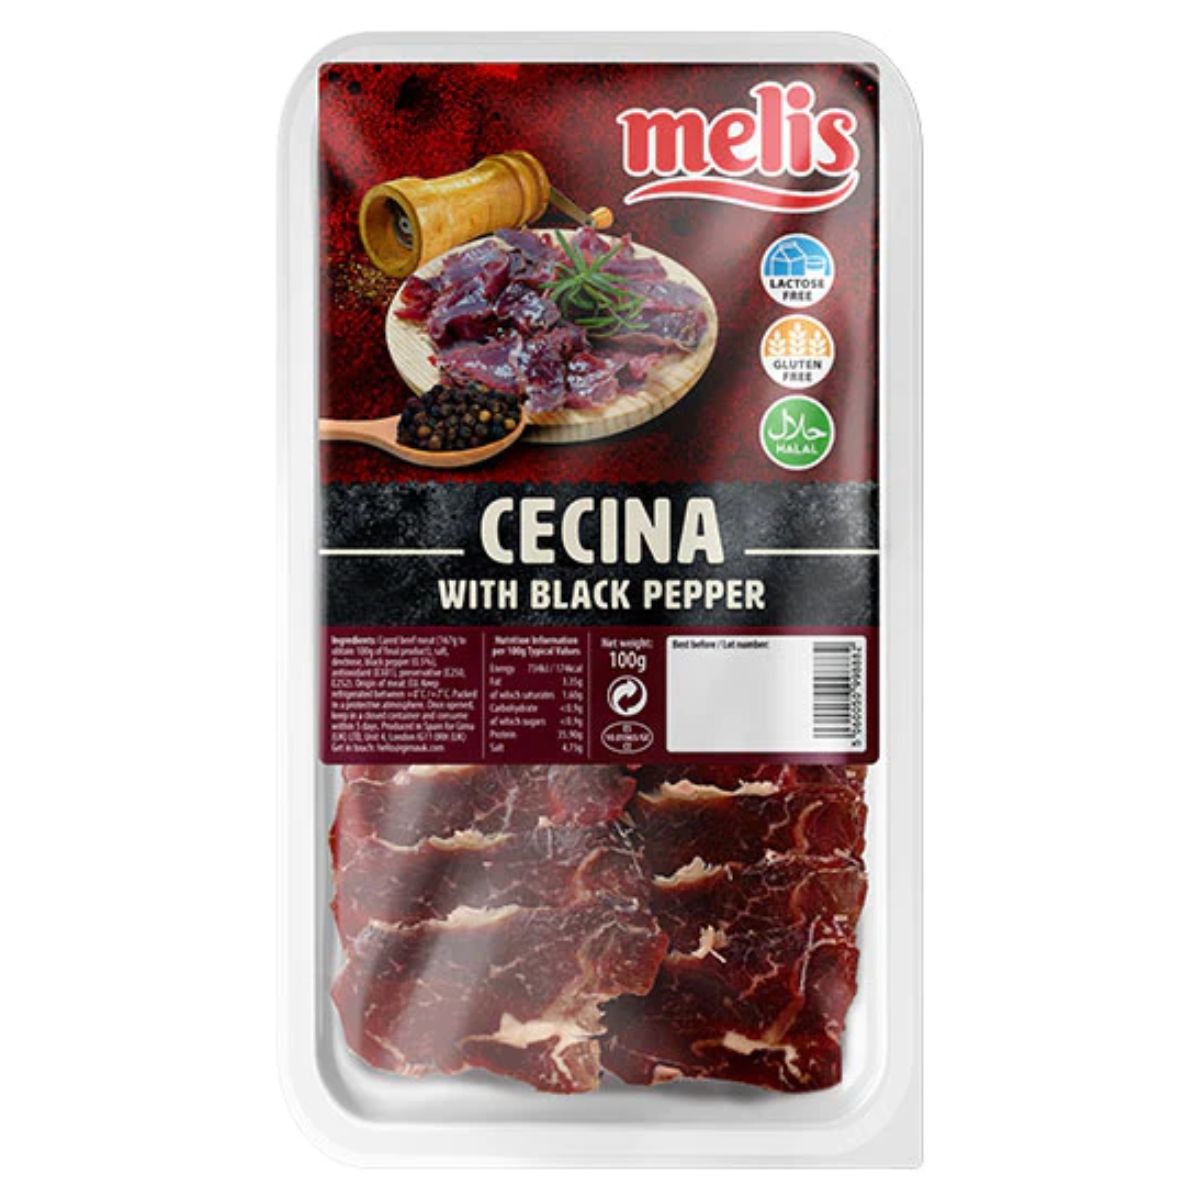 Melis - Cecina with Black Peppper